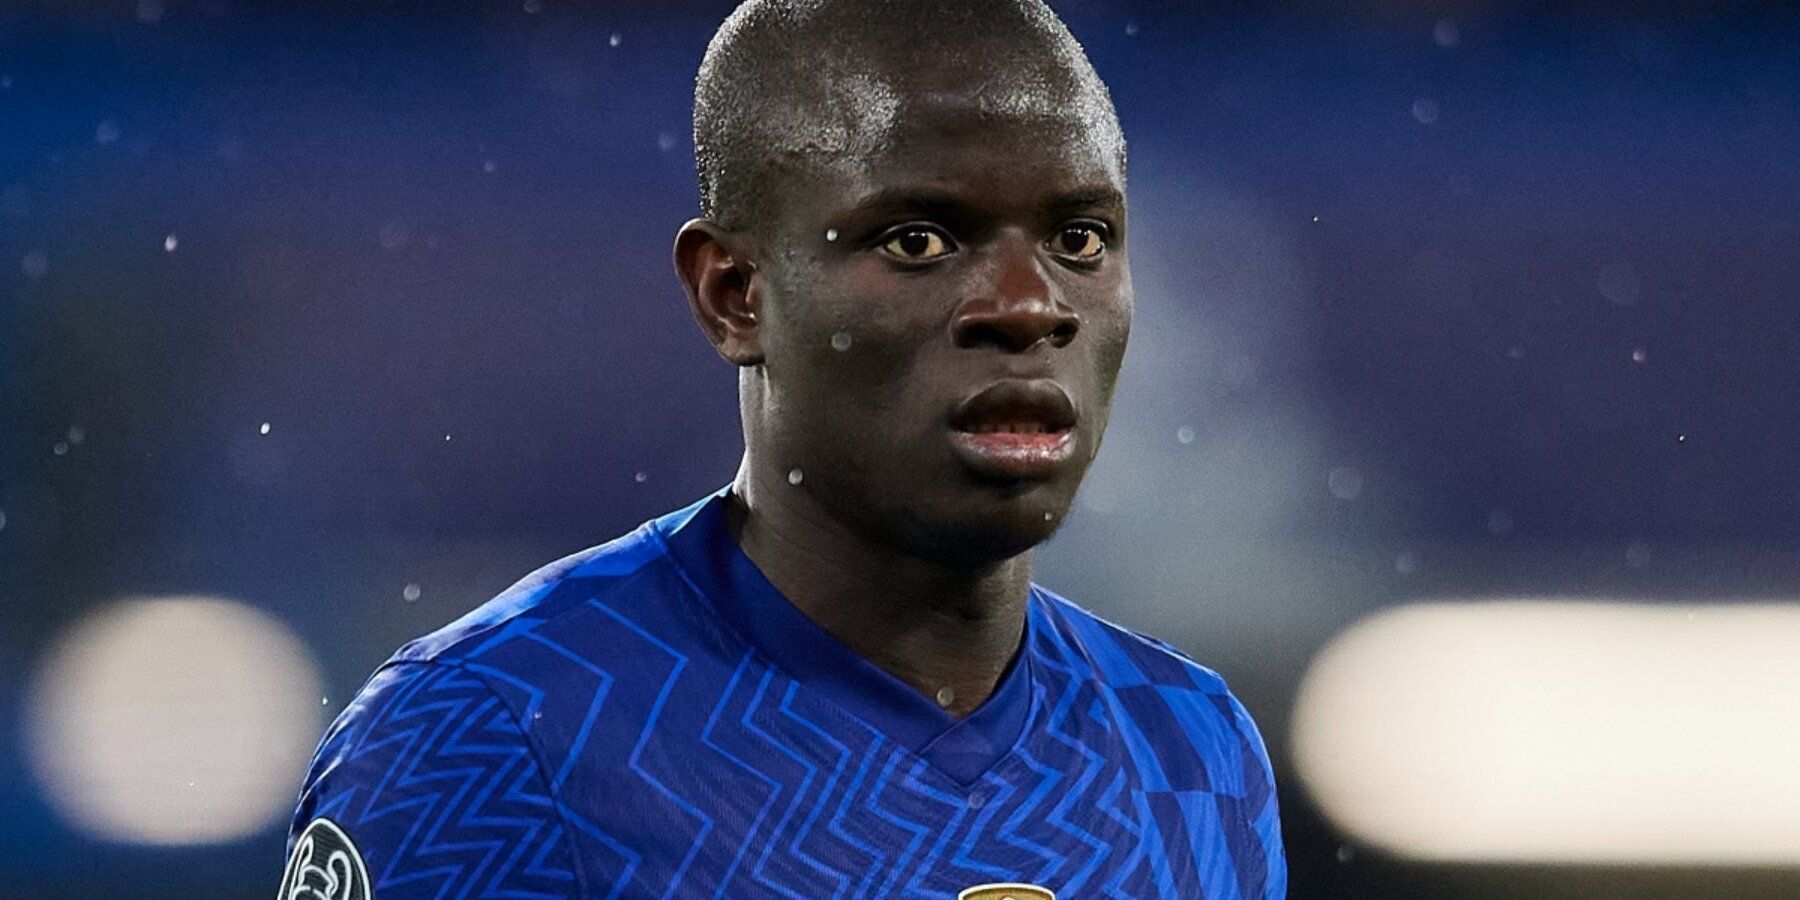 Kante playing for Chelsea